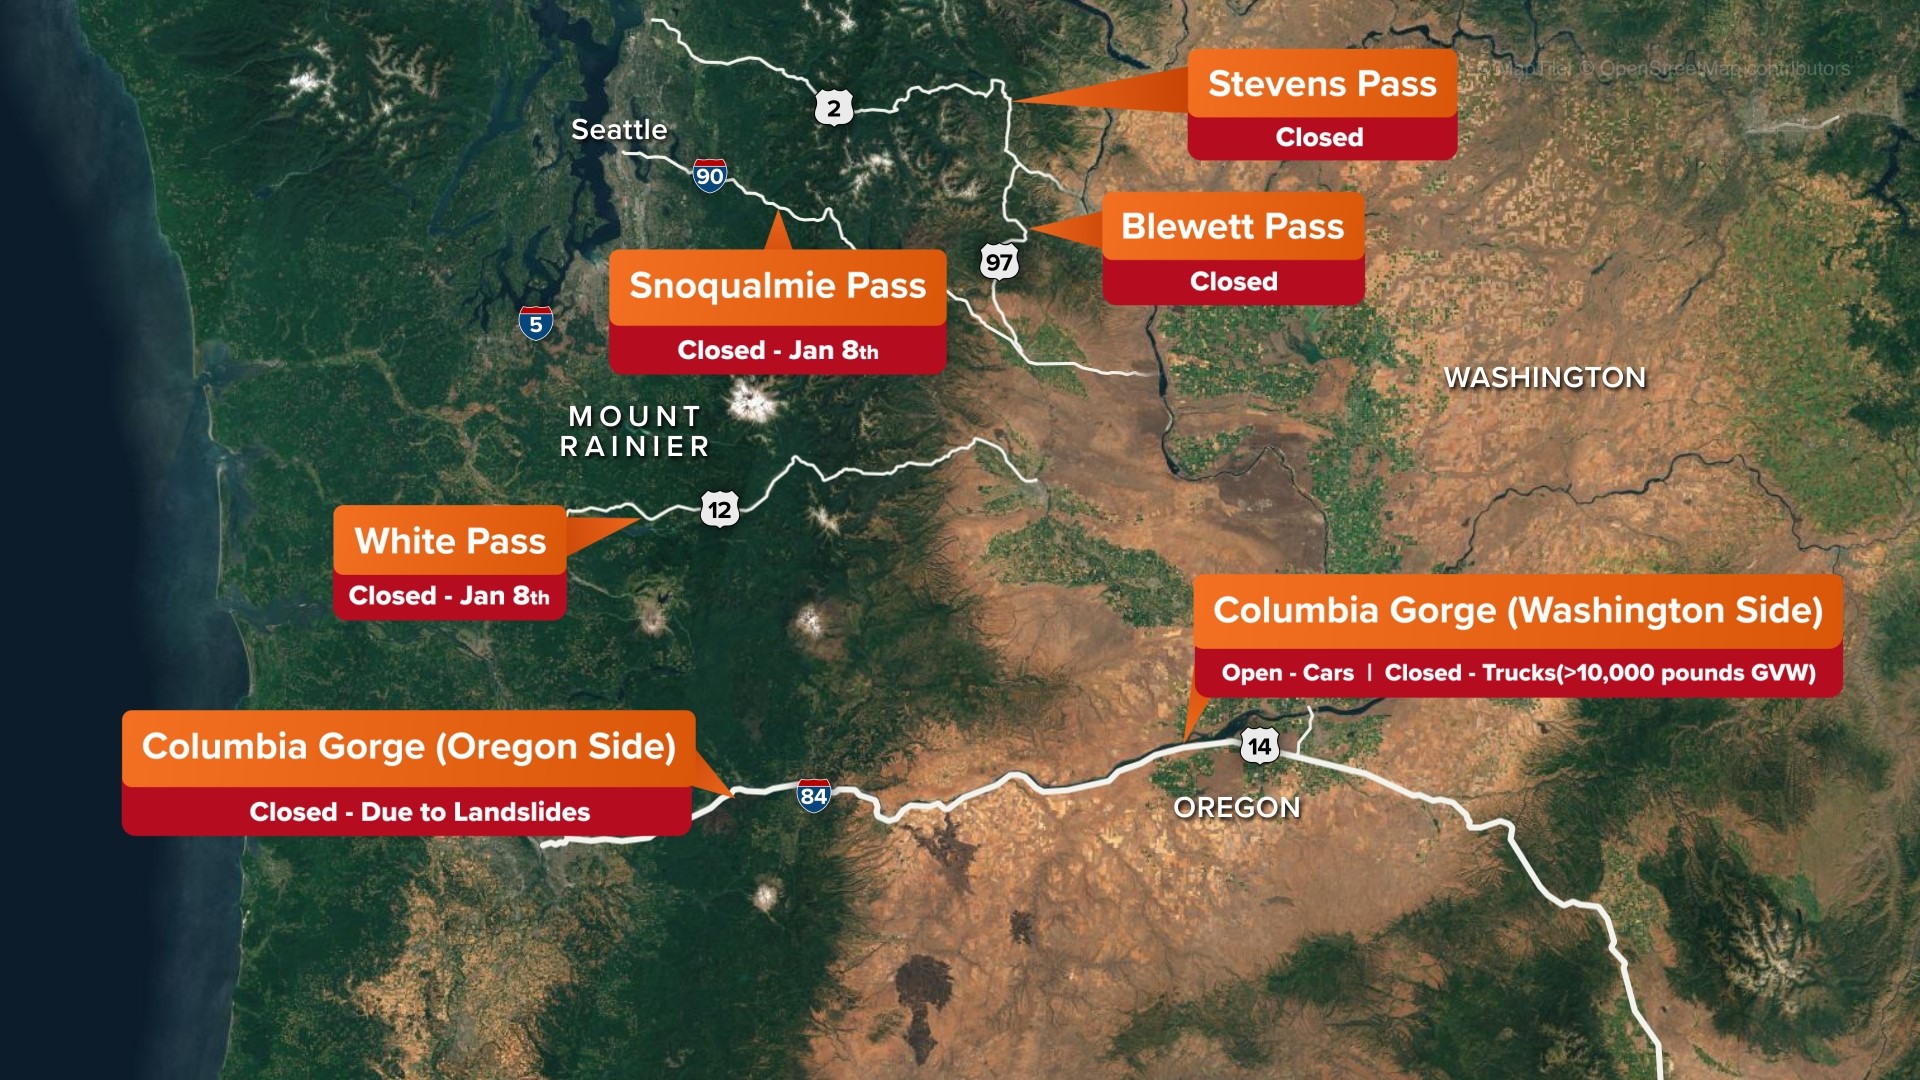 Snoqualmie, Stevens, White passes closed for snow, avalanche risk